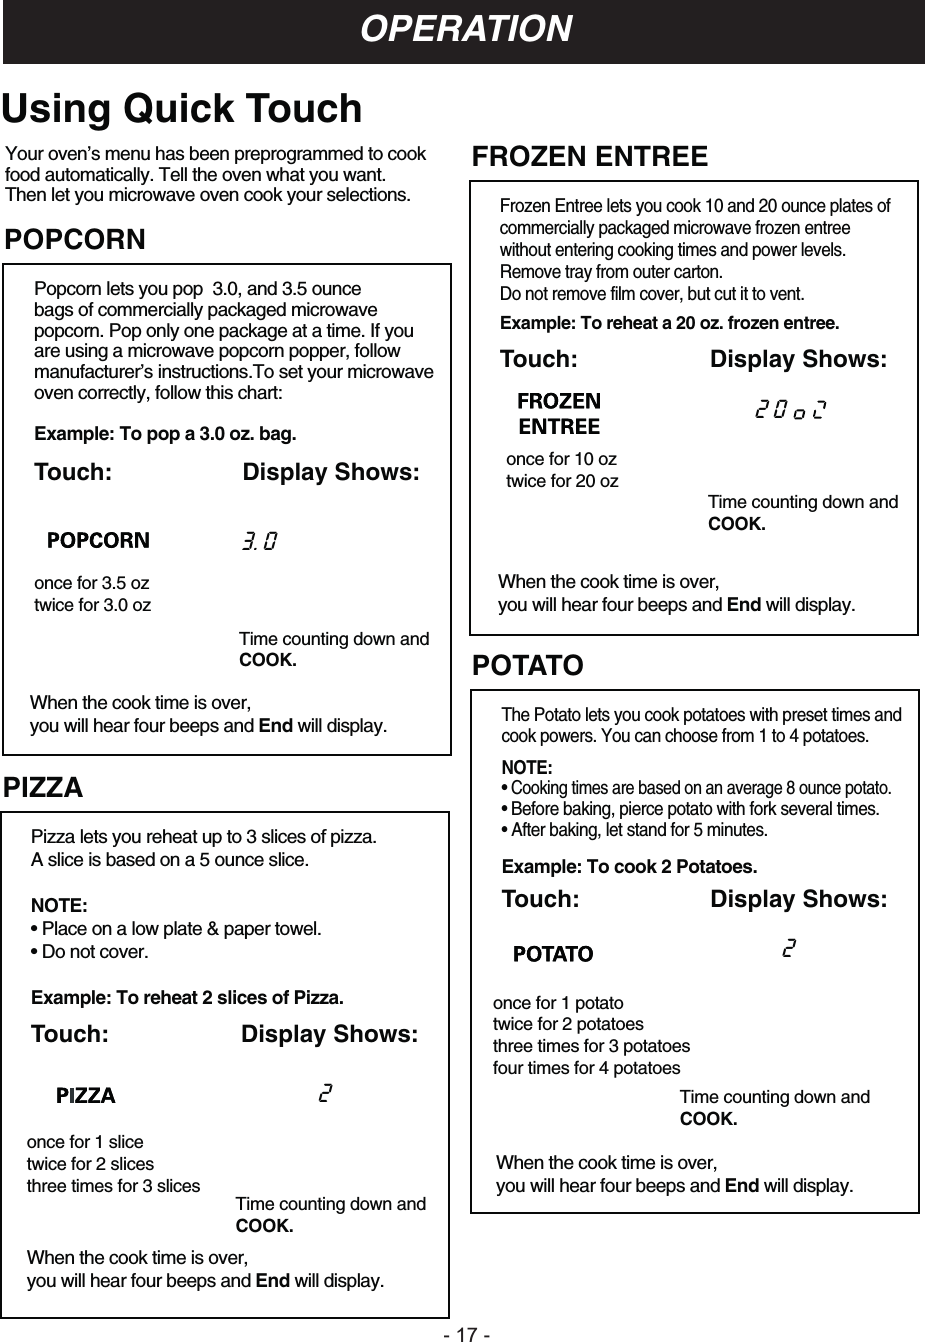 - 1 -OPERATION:Your oven’s menu has been preprogrammed to cookfood automatically. Tell the oven what you want.Then let you microwave oven cook your selections.PIZZAPizza lets you reheat up to 3 slices of pizza.A slice is based on a 5 ounce slice.NOTE:• Place on a low plate &amp; paper towel.• Do not cover.Example: To reheat 2 slices of Pizza.Touch: Display Shows:Time counting down andCOOK.When the cook time is over, you will hear four beeps and End will display.2POPCORNPopcorn lets you pop  3.0, and 3.5 ouncebags of commercially packaged microwavepopcorn. Pop only one package at a time. If youare using a microwave popcorn popper, followmanufacturer’s instructions.To set your microwaveoven correctly, follow this chart:Example: To pop a 3.0 oz. bag.Touch: Display Shows:once for 3.5 oztwice for 3.0 ozTime counting down andCOOK.When the cook time is over, you will hear four beeps and End will display.once for 1 slicetwice for 2 slicesthree times for 3 slices3. 0 Using Quick TouchFROZEN ENTREEFrozen Entree lets you cook 10 and 20 ounce plates ofcommercially packaged microwave frozen entreewithout entering cooking times and power levels.Remove tray from outer carton.Do not remove film cover, but cut it to vent.Example: To reheat a 20 oz. frozen entree.Touch: Display Shows:POTATOThe Potato lets you cook potatoes with preset times andcook powers. You can choose from 1 to 4 potatoes.NOTE:• Cooking times are based on an average 8 ounce potato.• Before baking, pierce potato with fork several times.• After baking, let stand for 5 minutes.Example: To cook 2 Potatoes.Touch: Display Shows:When the cook time is over, you will hear four beeps and End will display.Time counting down andCOOK.2 02Time counting down andCOOK.When the cook time is over, you will hear four beeps and End will display.once for 10 oztwice for 20 ozonce for 1 potatotwice for 2 potatoesthree times for 3 potatoesfour times for 4 potatoes